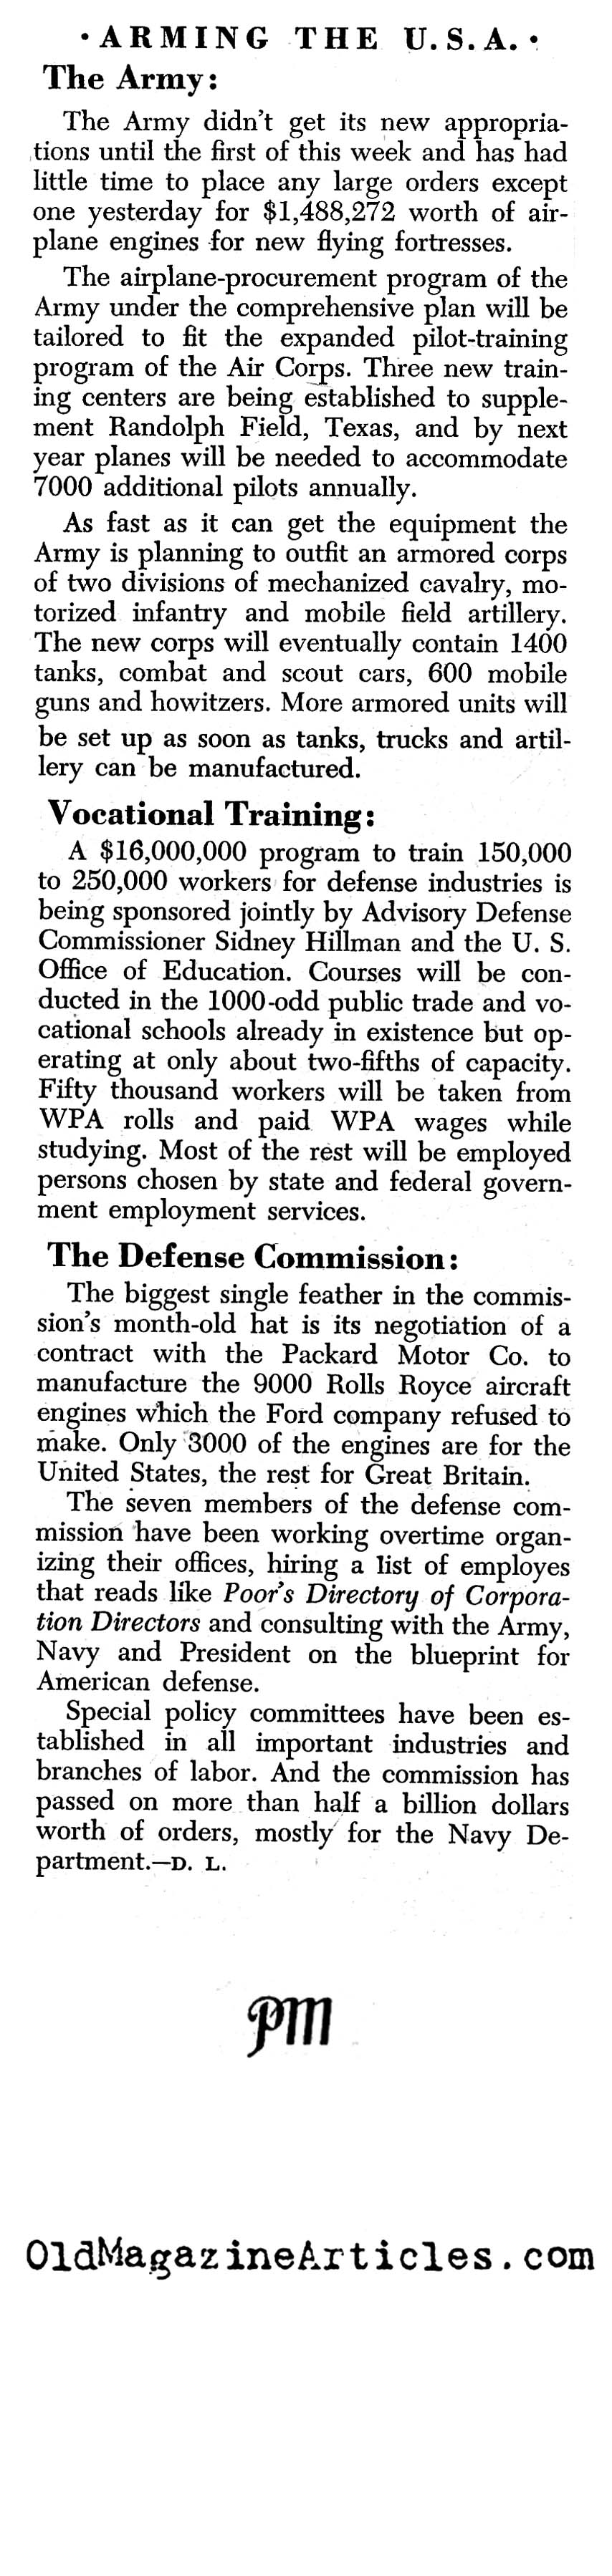 Congress Approved $5,000,000,000 Build-Up (PM Tabloid, 1940)